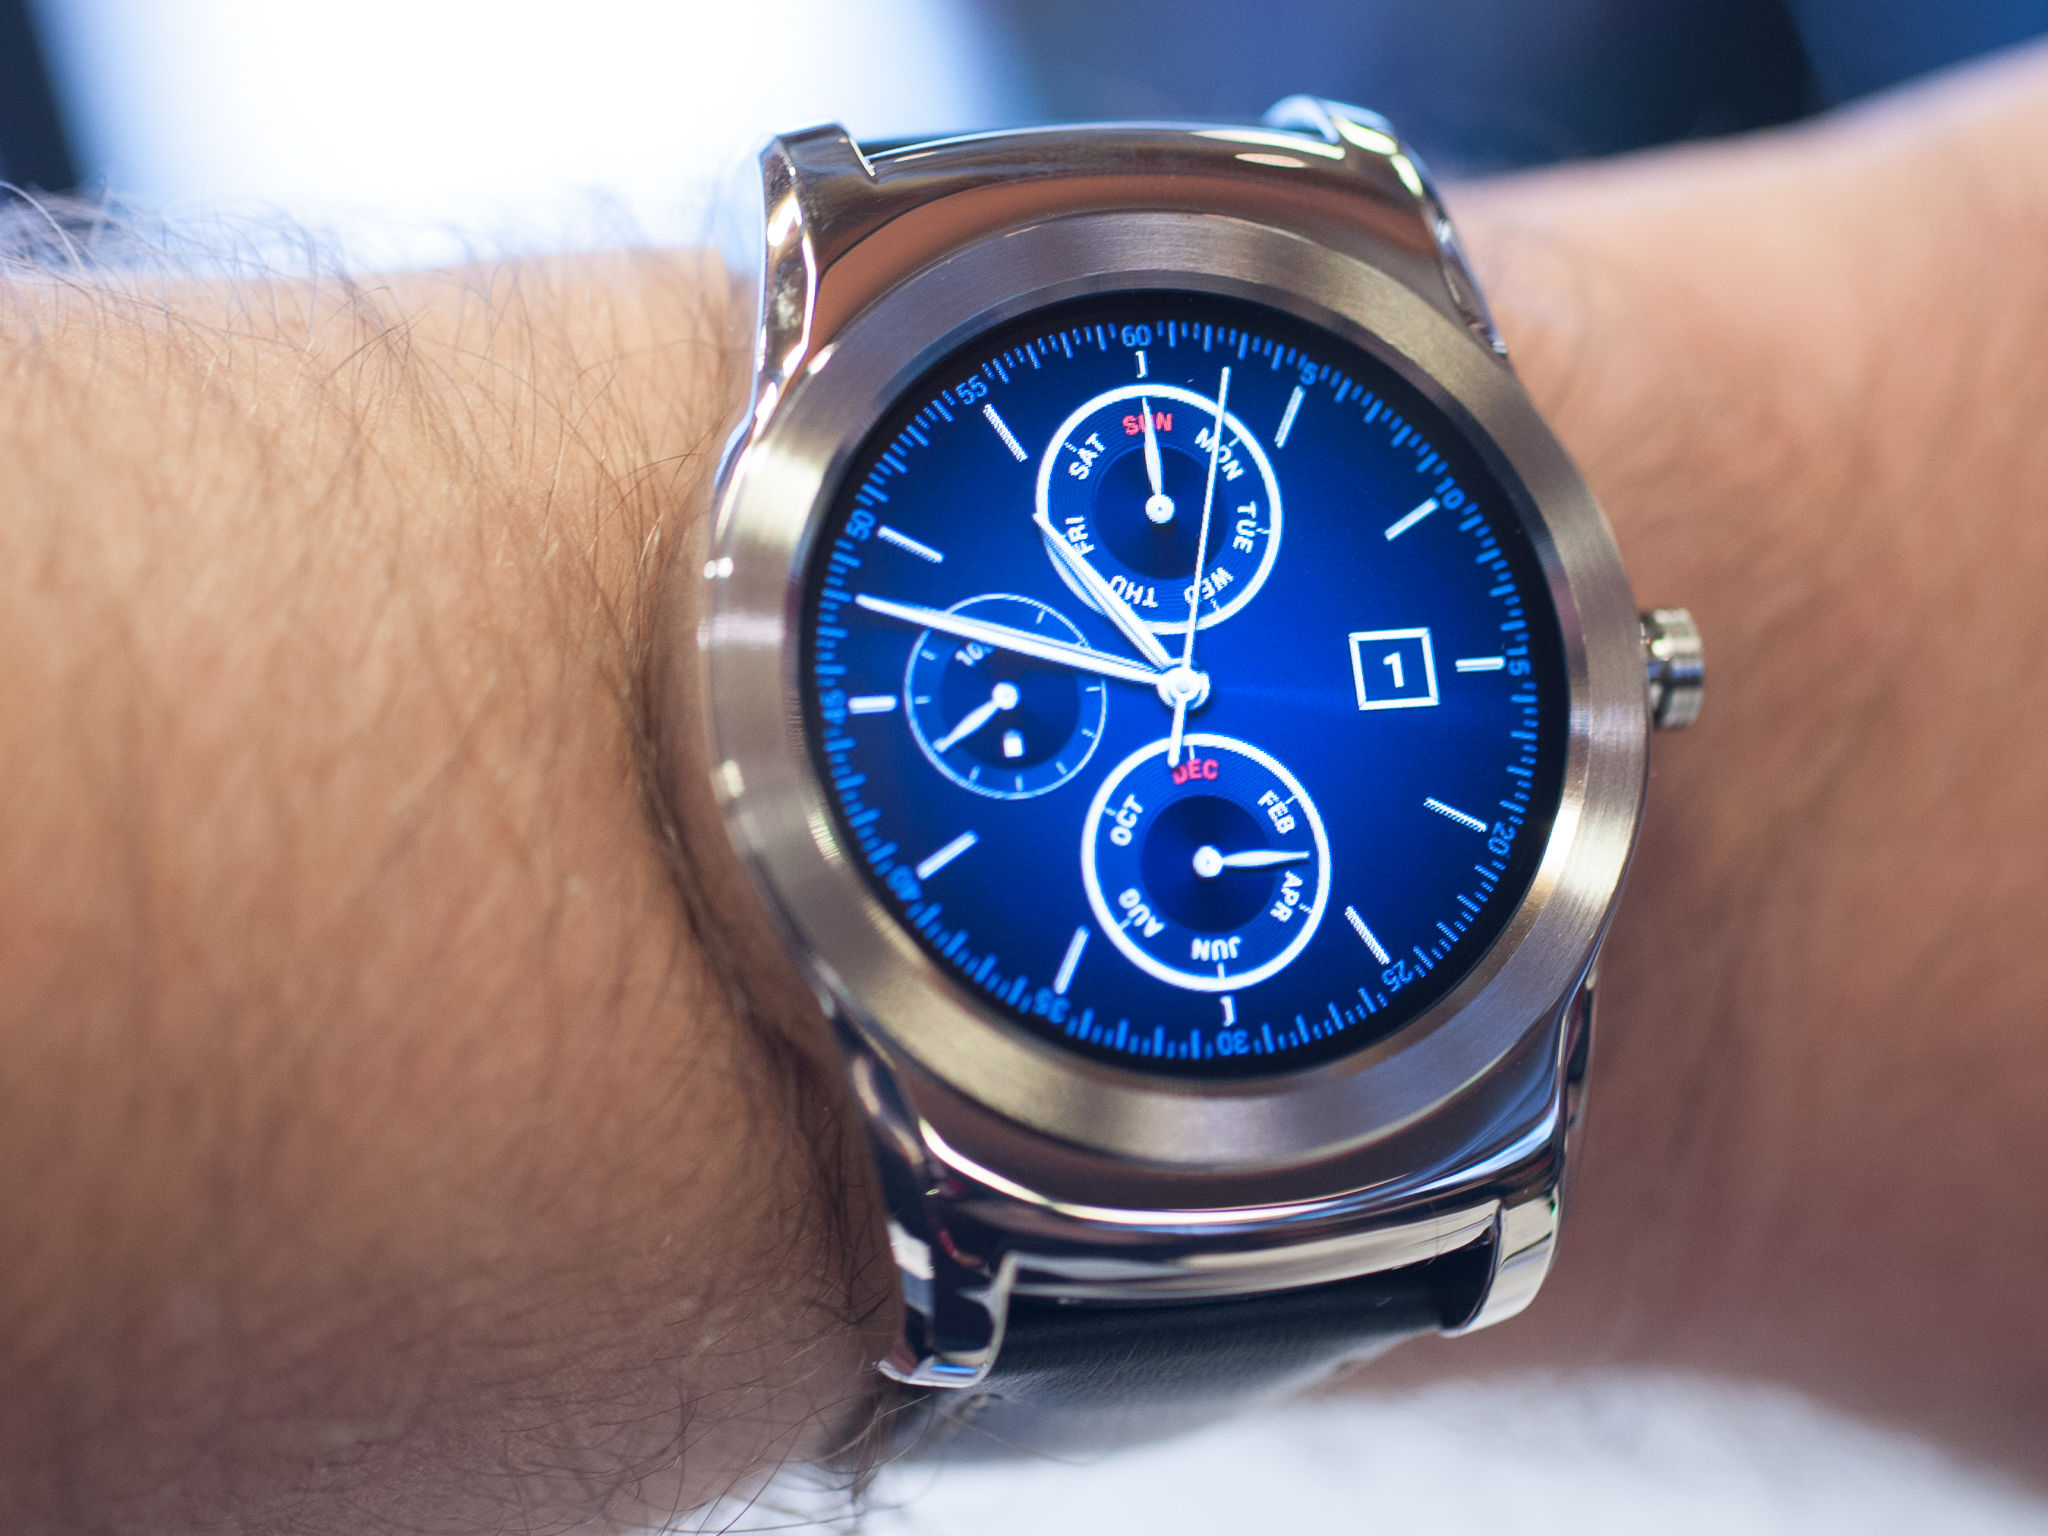 Verizon to carry LG Watch Urbane on April 28 for $349